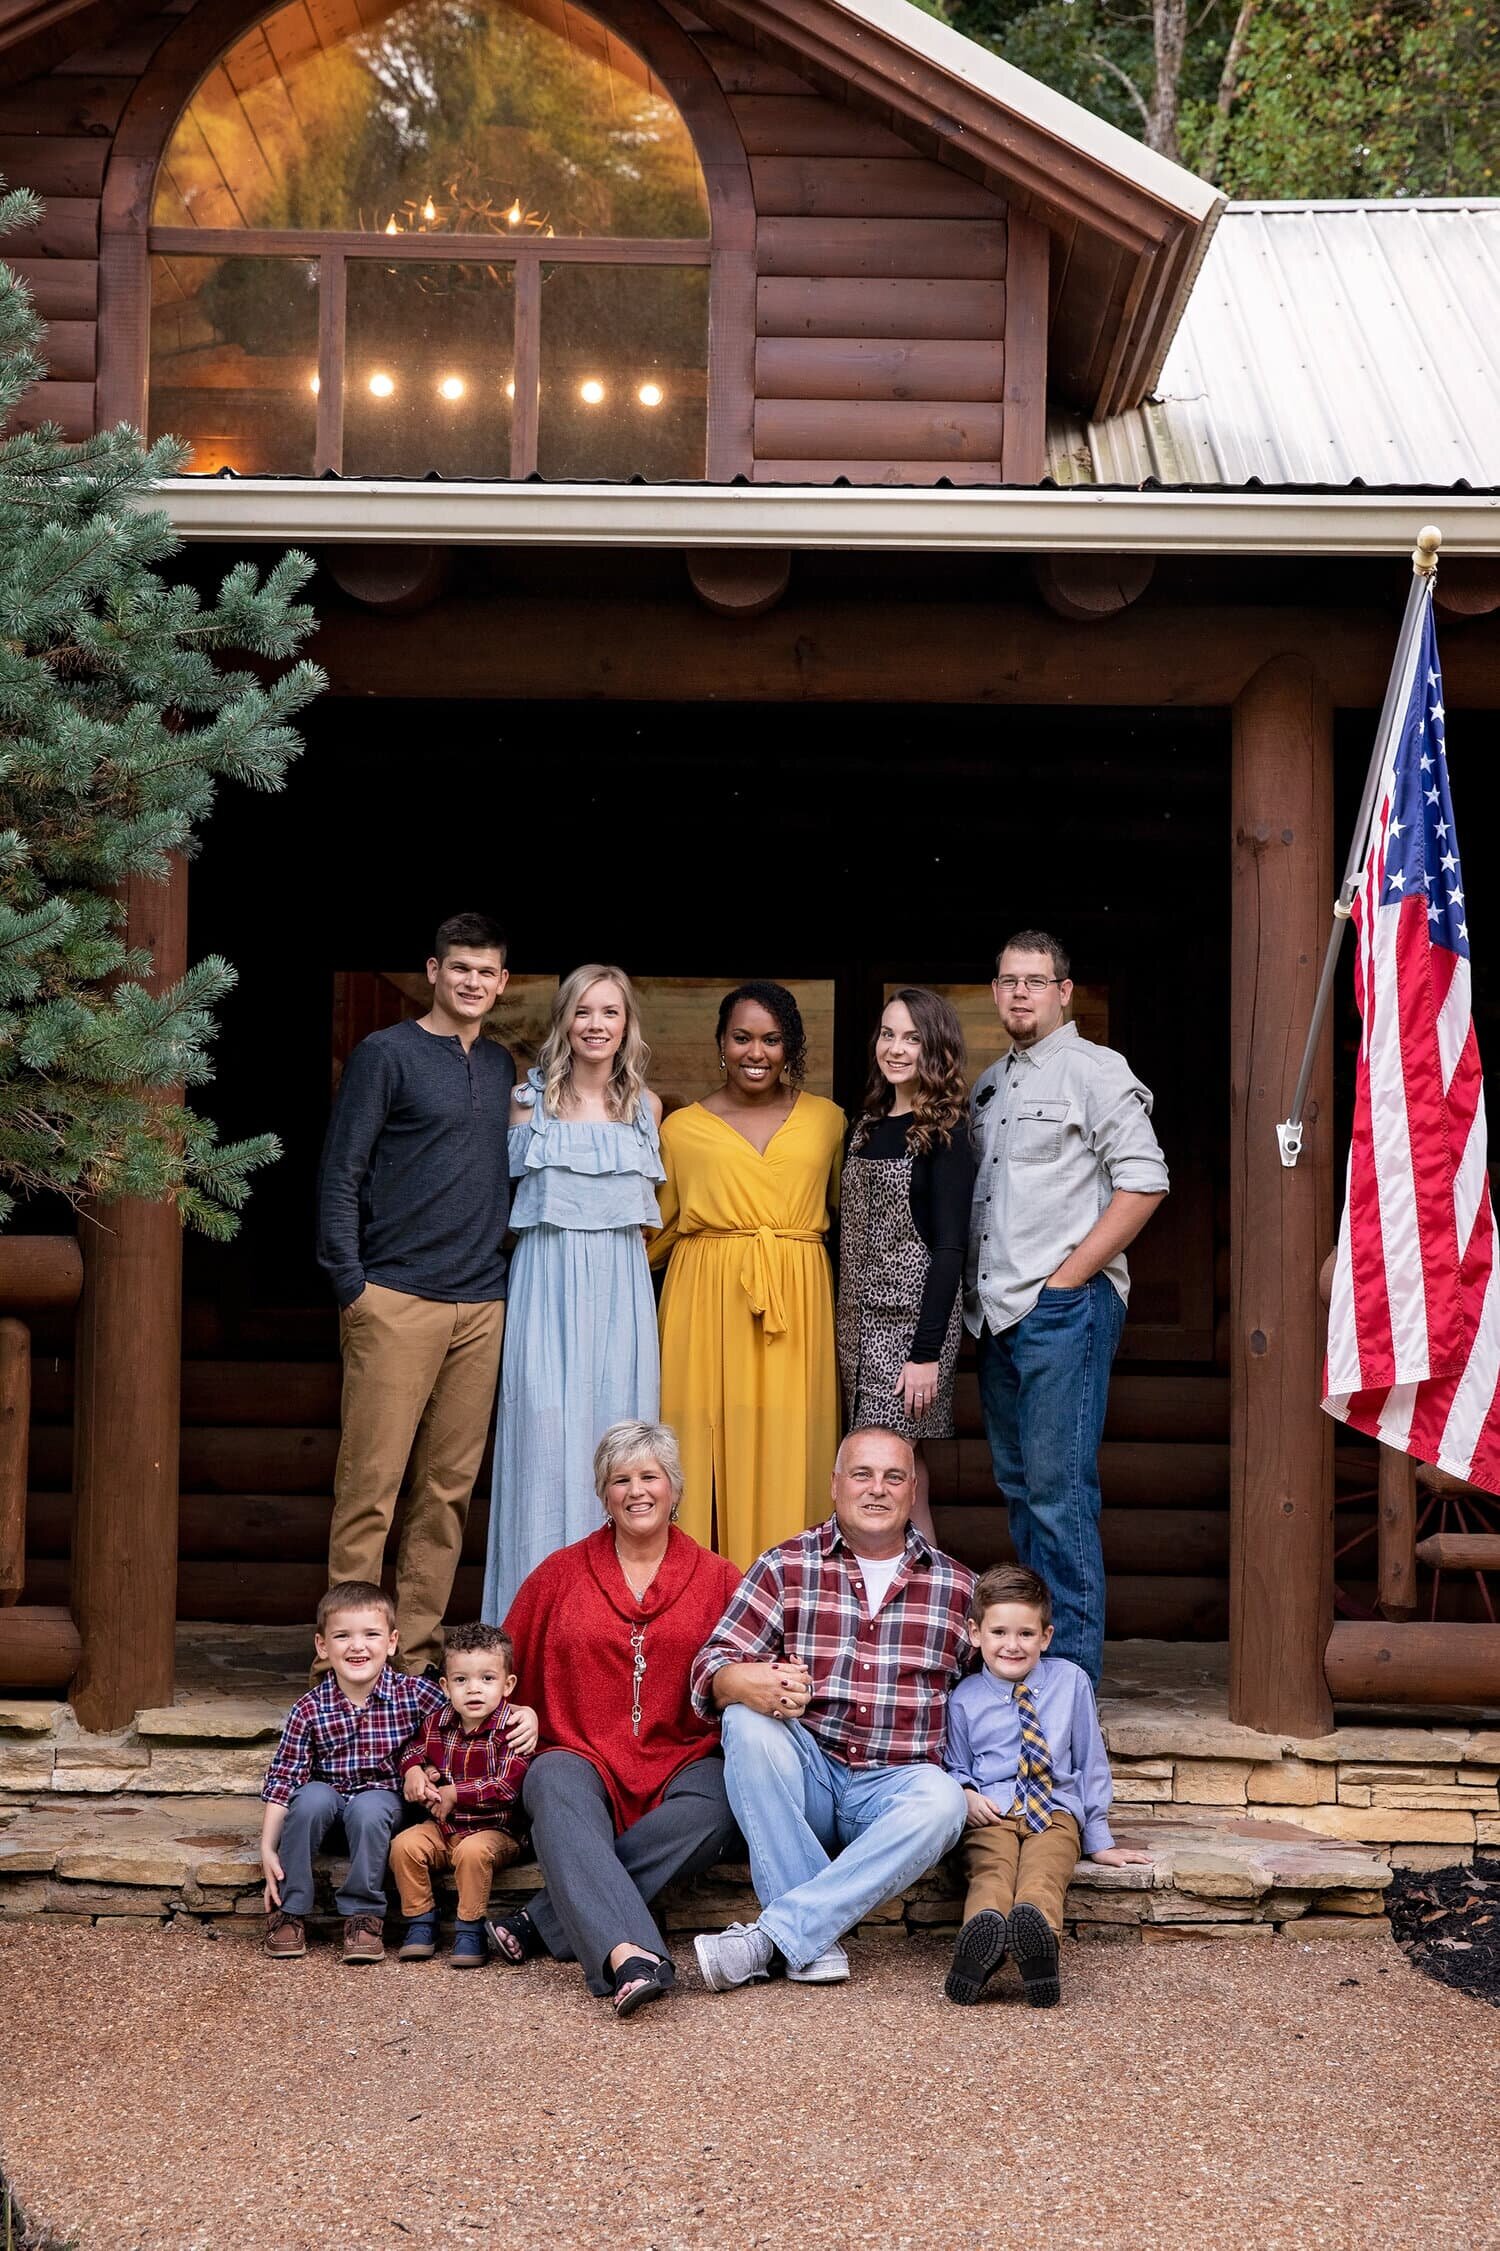 pigeon-forge-tn-family-portrait-at-cabin.jpg